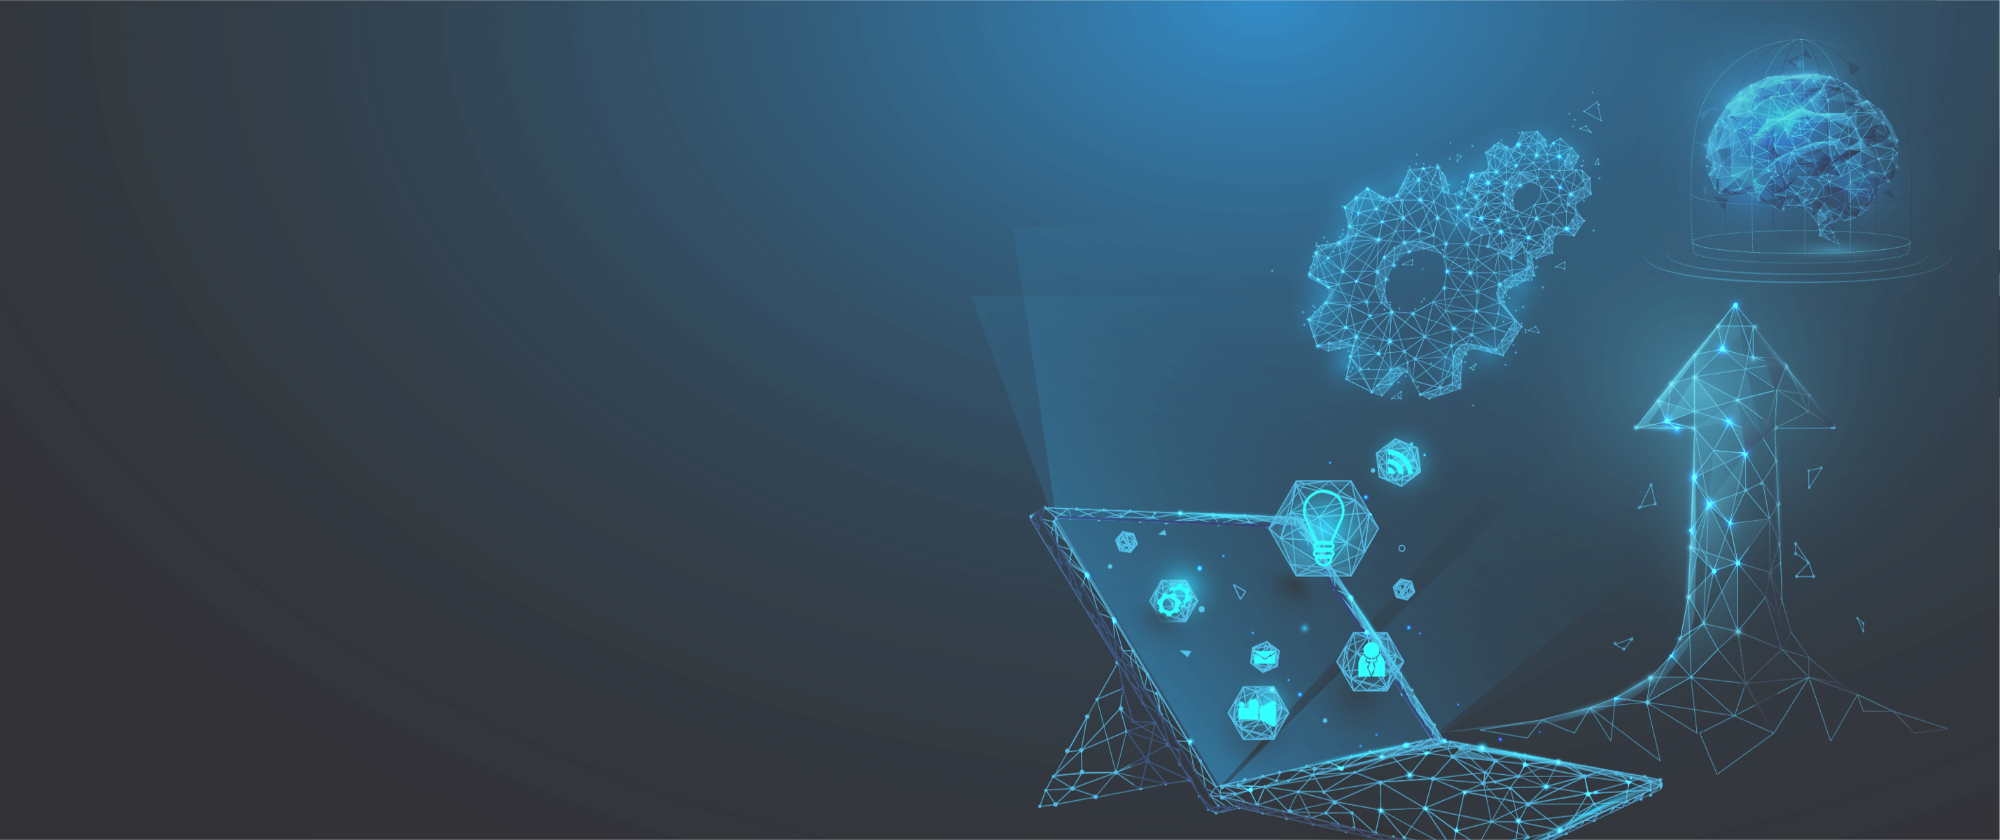 Digital transformation and innovation concept: a laptop with holographic projections of 3d models, data structures, and connectivity arrows on a dark blue background, depicting advanced technology and futuristic computing.